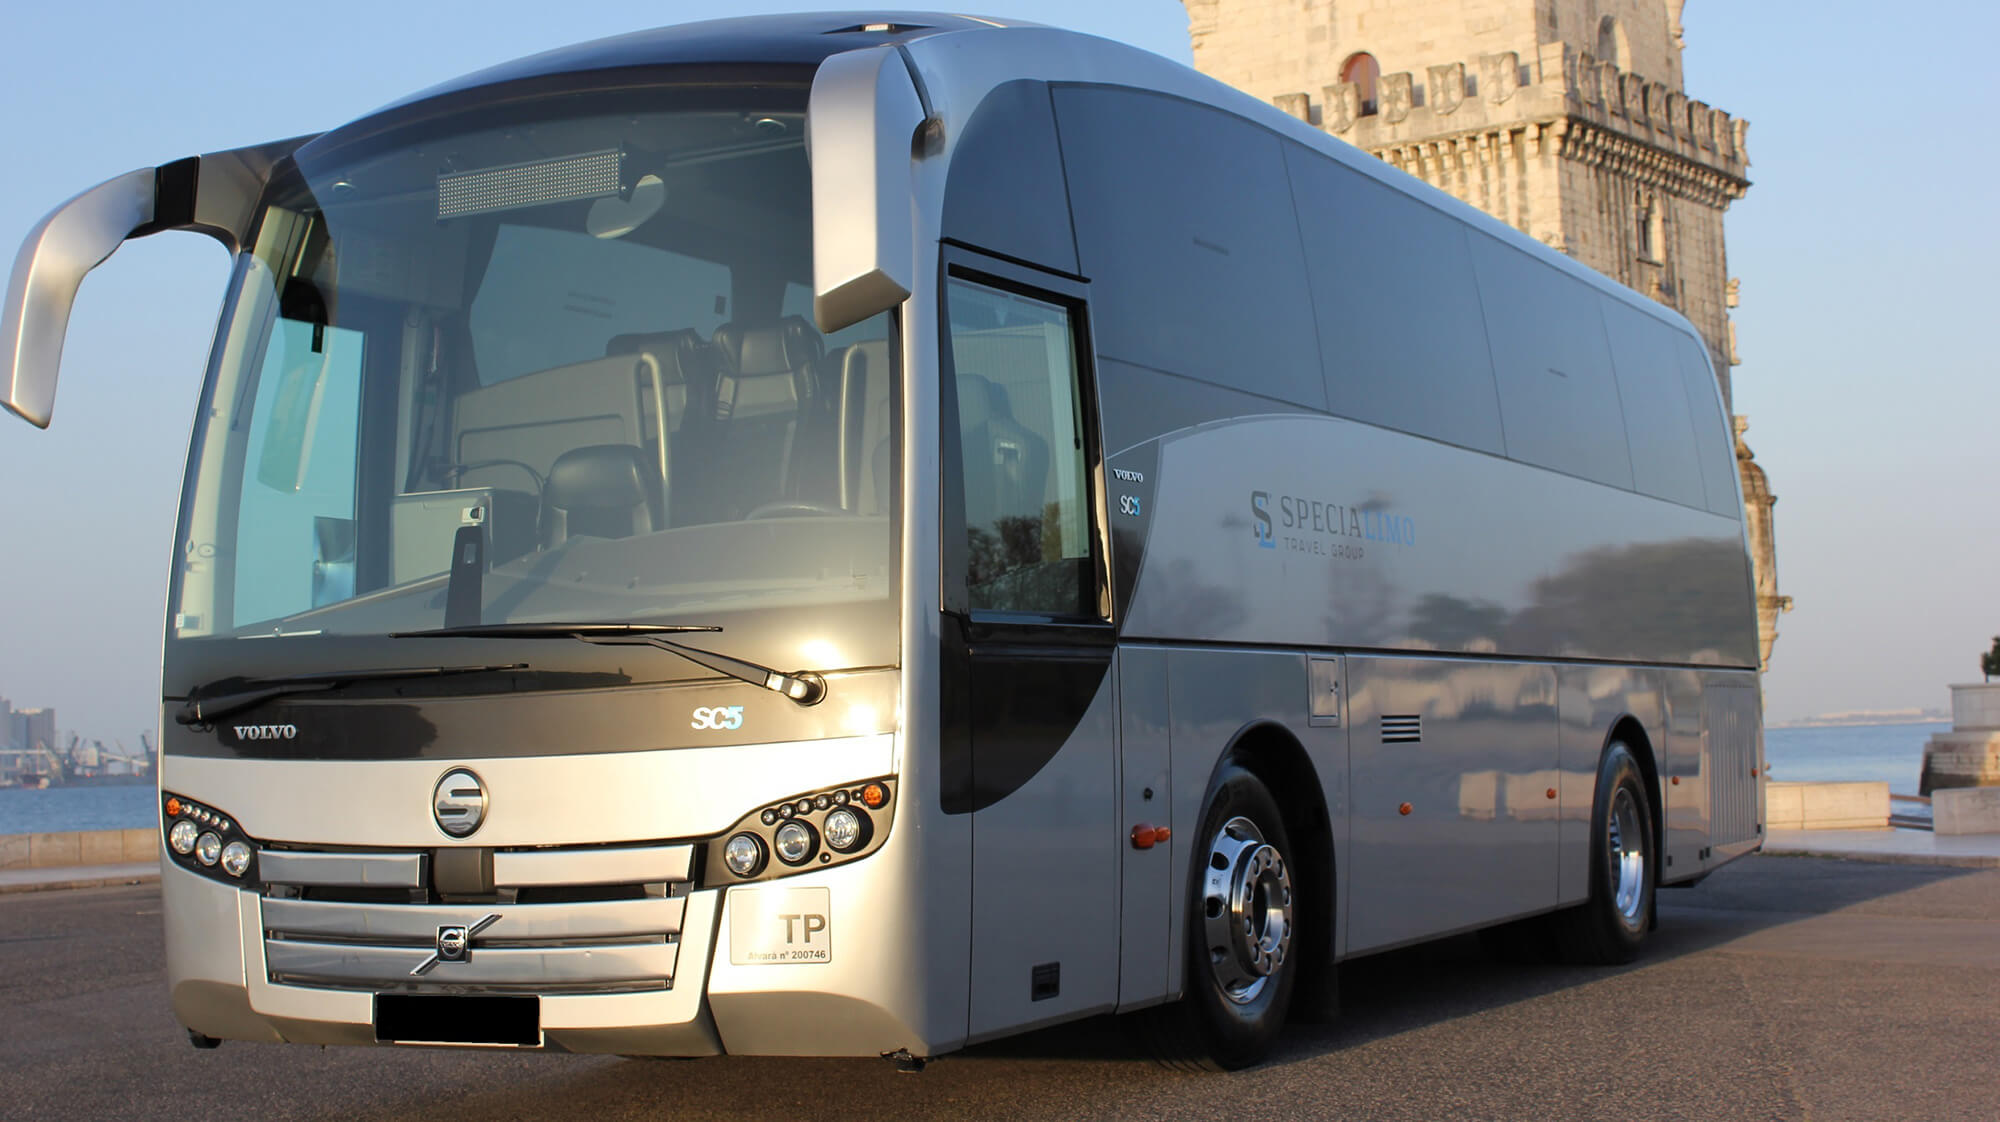 Hire a 40 seater Luxury VIP Coach (Volvo Sumsundegui 2018) from SPECIALIMO TRAVEL GROUP in Almargem do Bispo, Sintra 